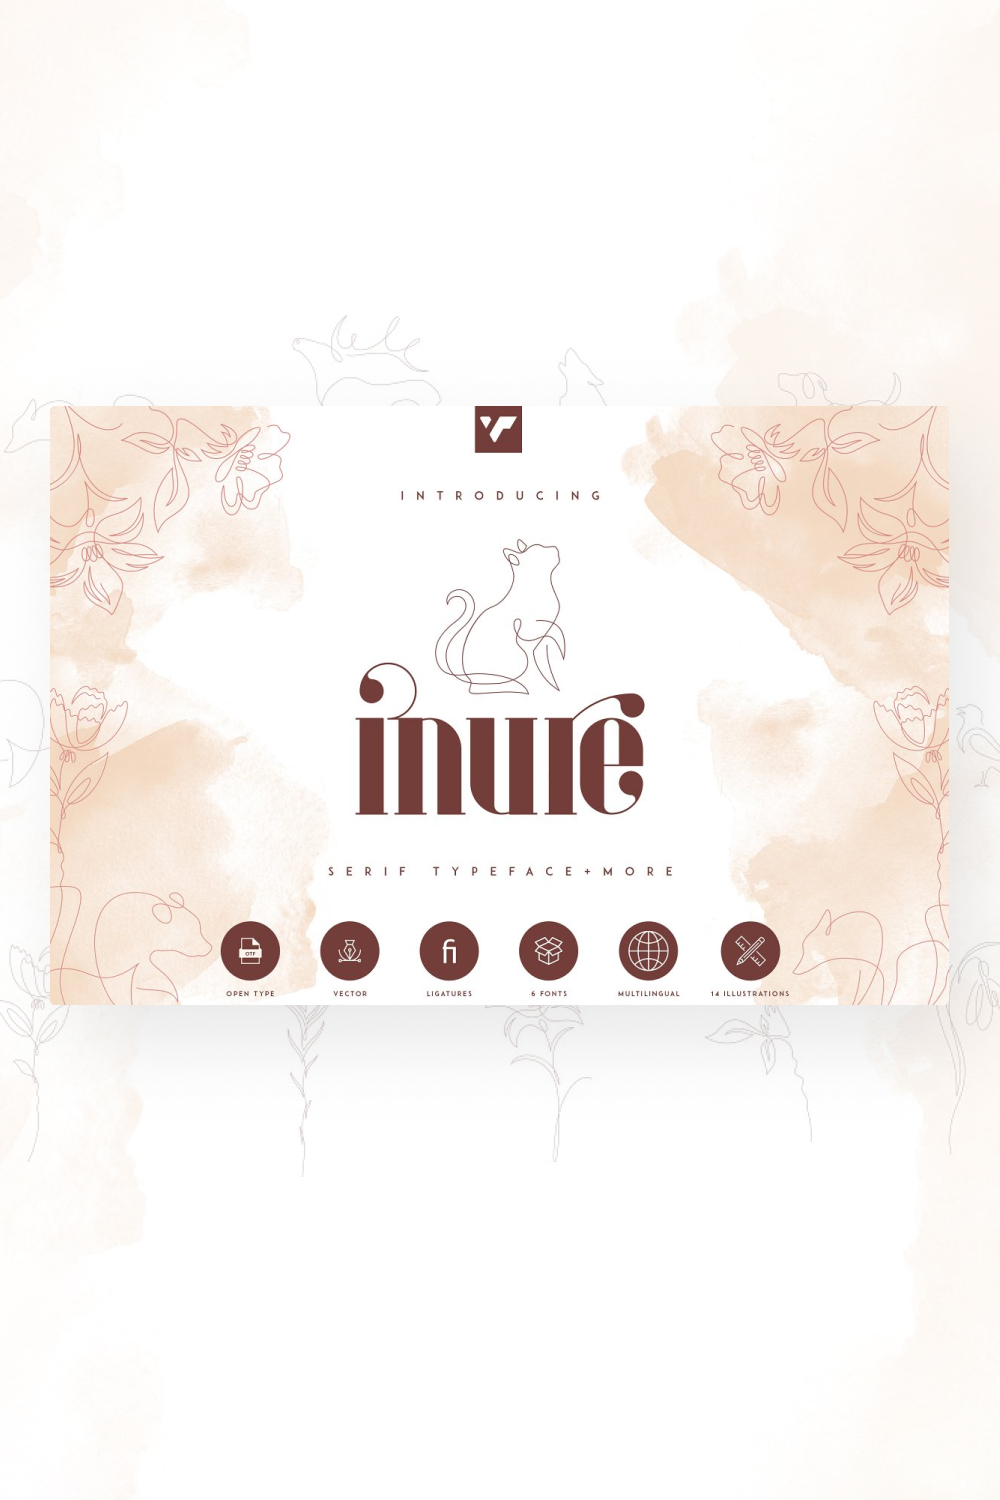 Inure – Serif Typeface More Pinterest cover image.